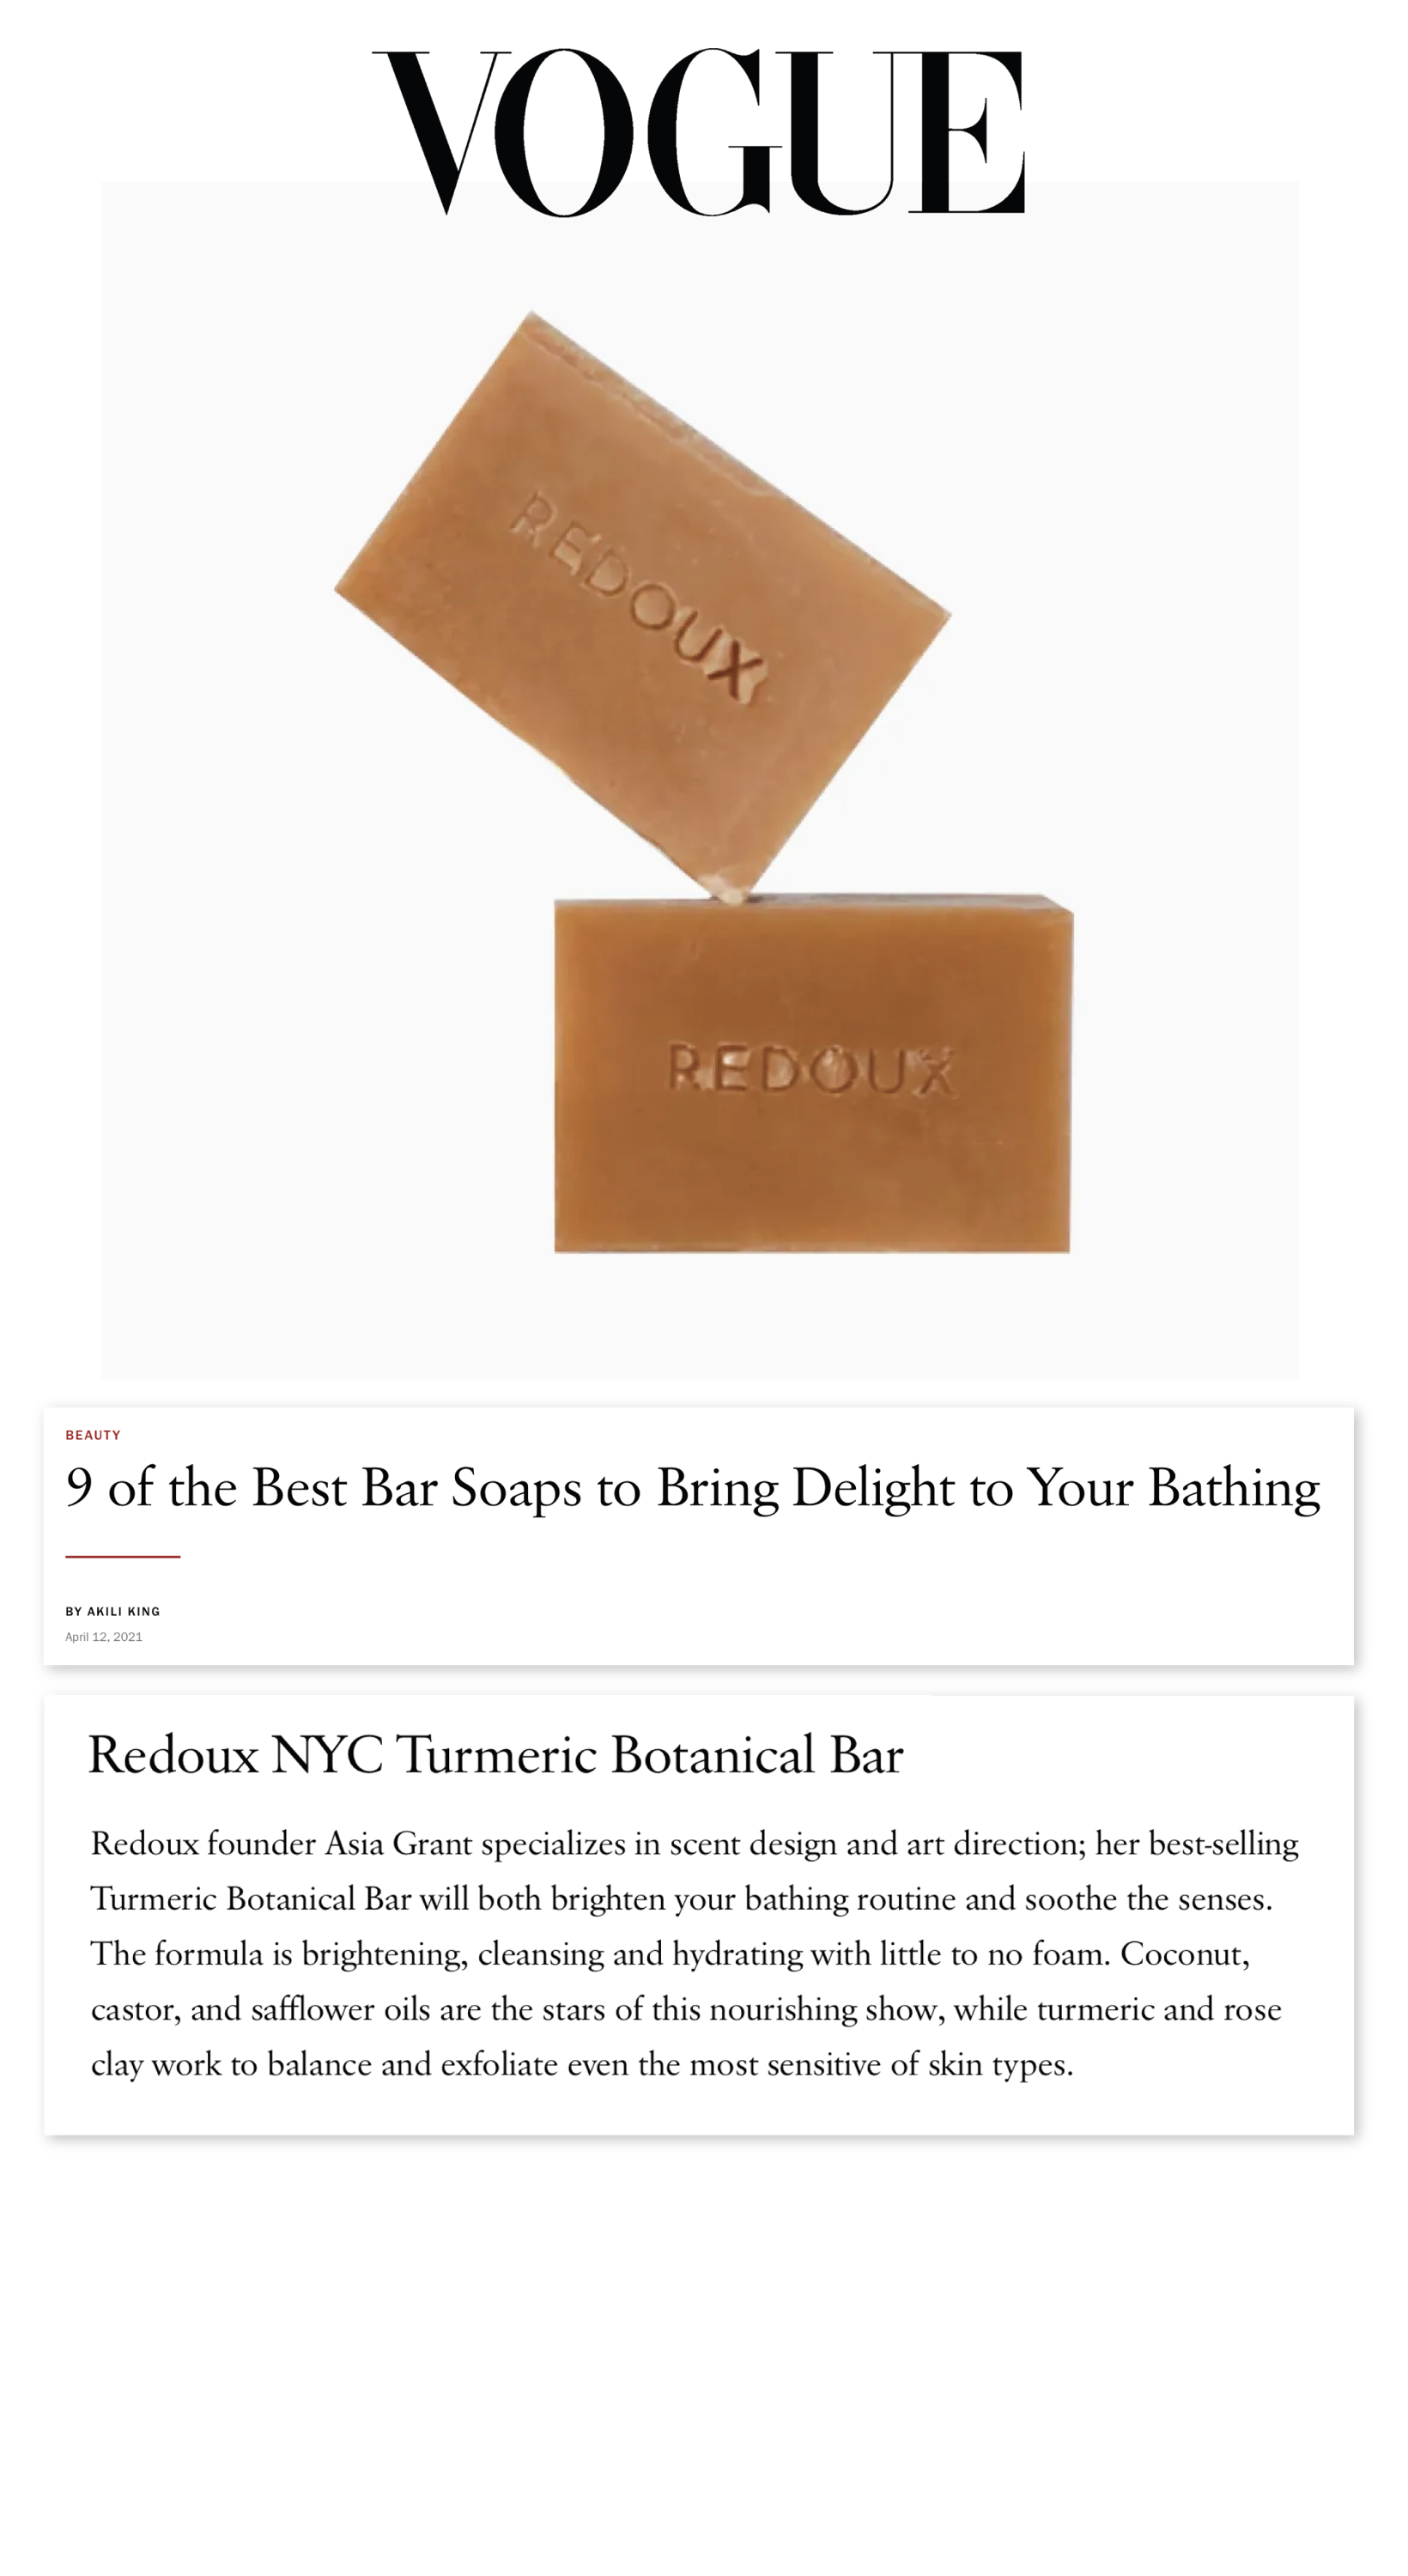 Redoux founder Asia Grant specializes in scent design and art direction; her best-selling Turmeric Botanical Bar will both brighten your bathing routine and soothe the senses. The formula is brightening, cleansing and hydrating with little to no foam. Coconut, castor, and safflower oils are the stars of this nourishing show, while turmeric and rose clay work to balance and exfoliate even the most sensitive of skin types. 